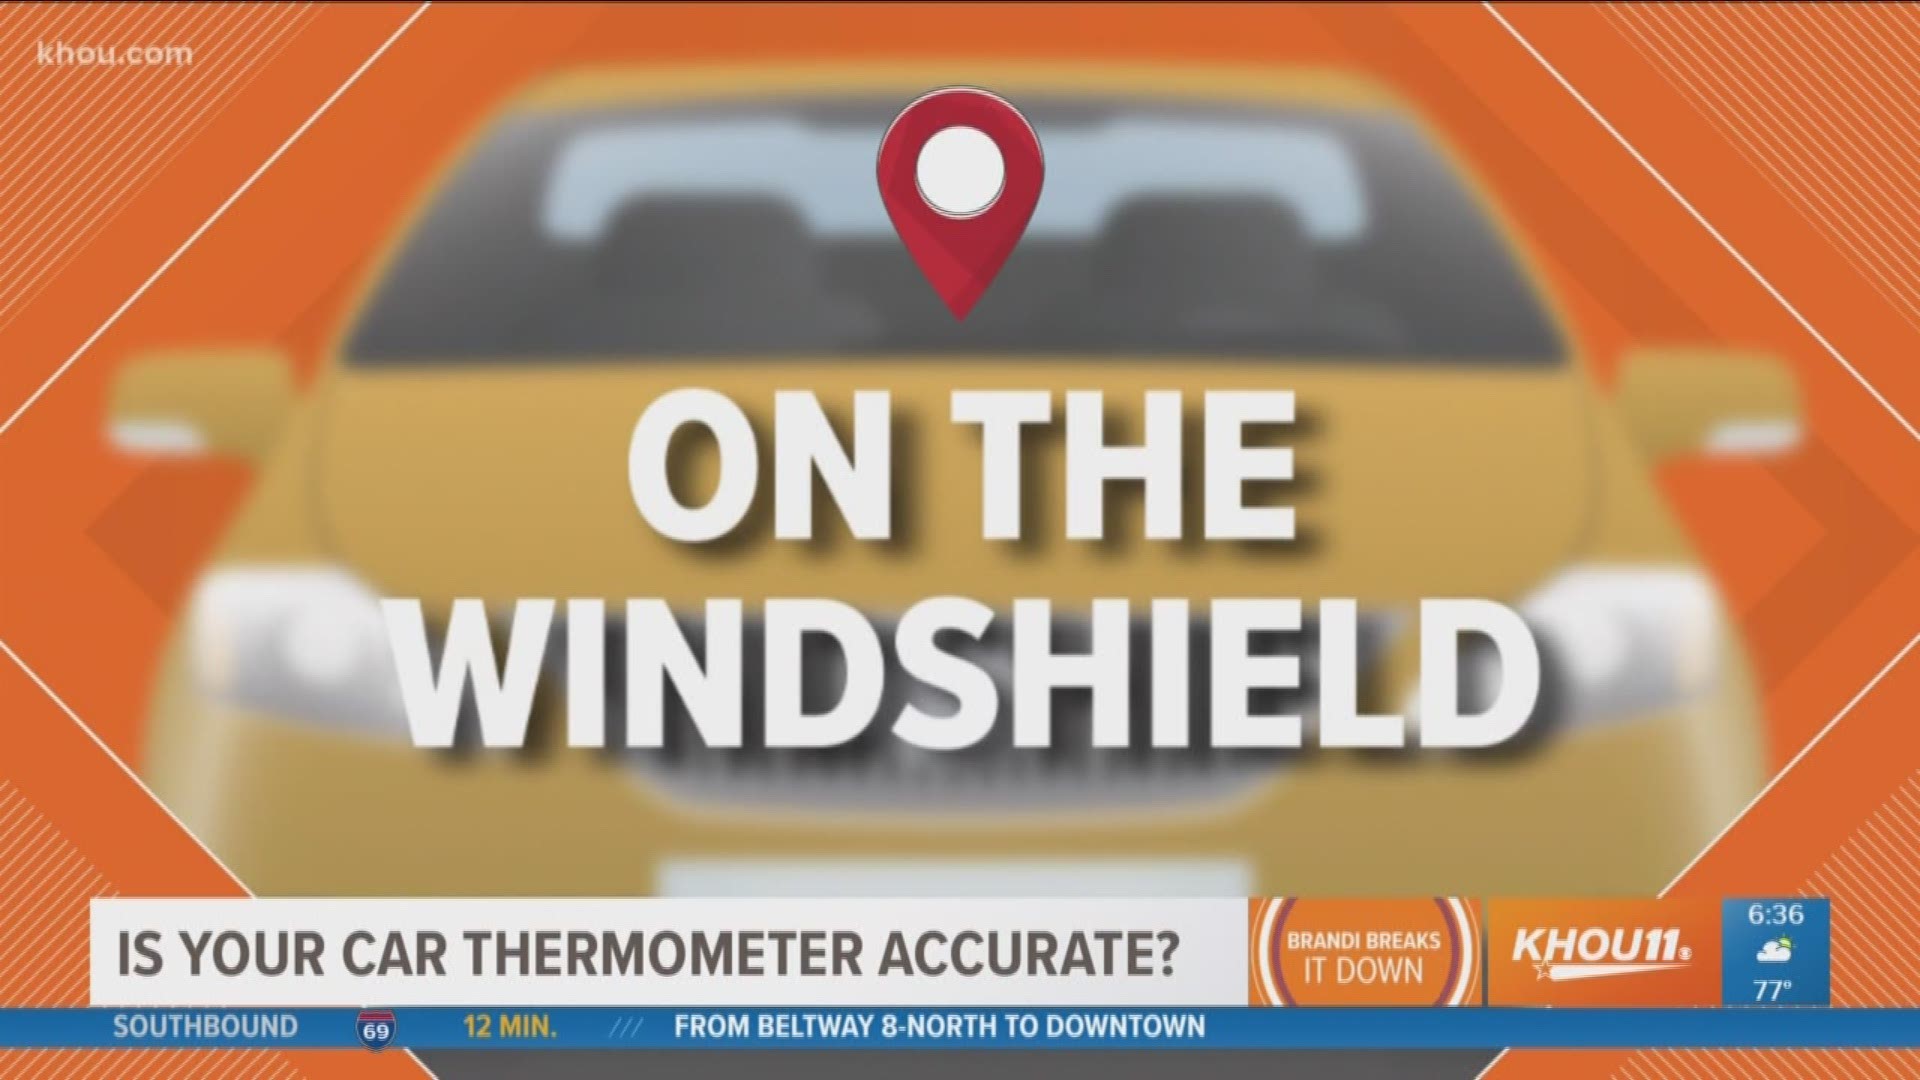 Why is your car thermometer always different from the actual temperature?